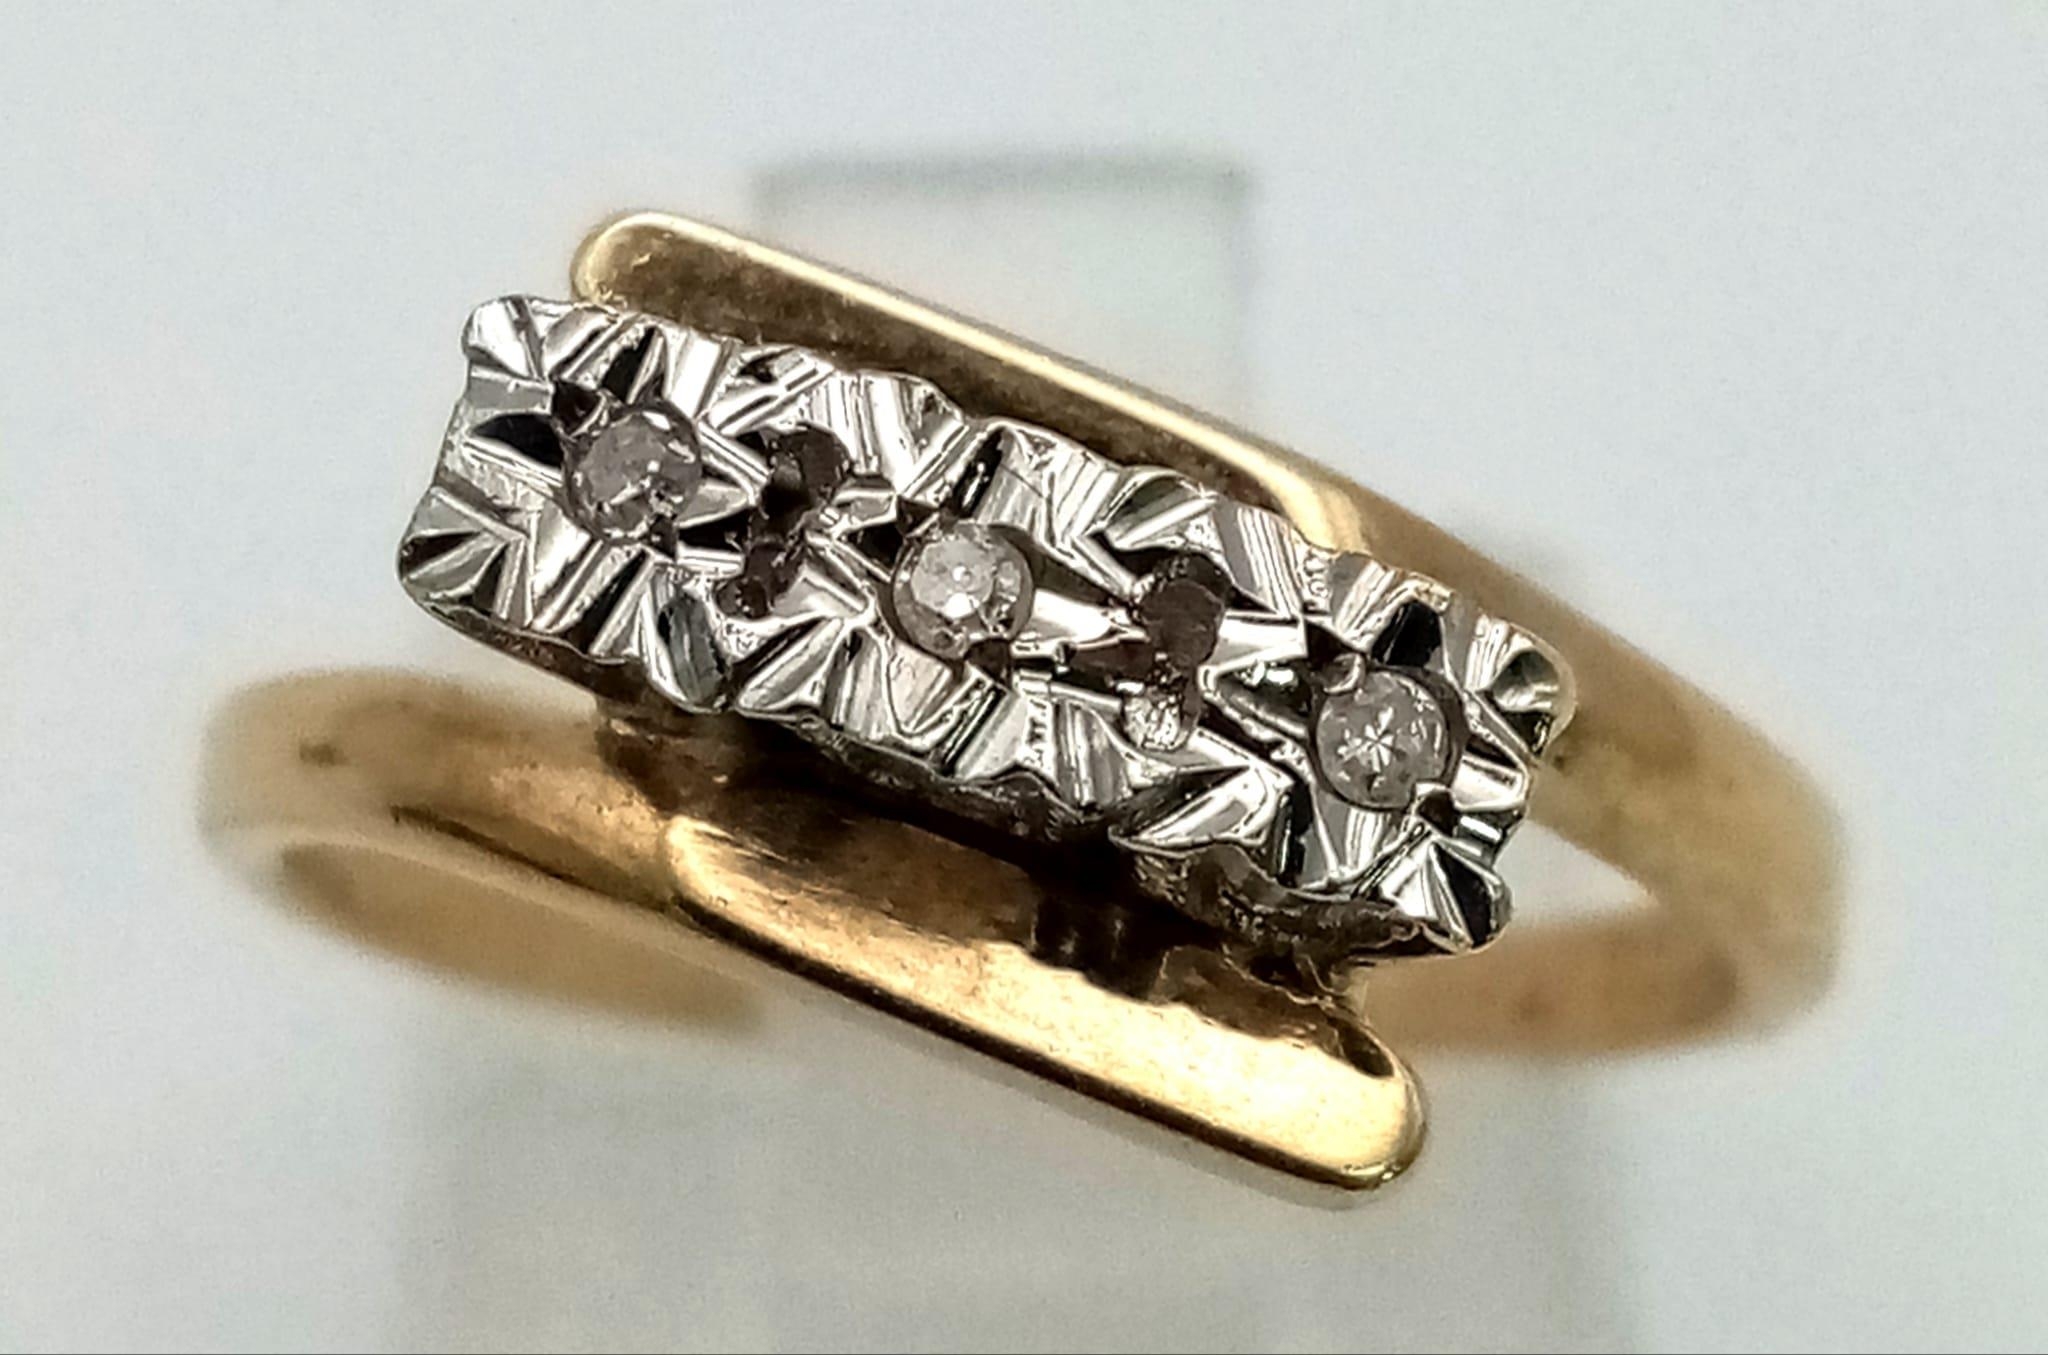 A mid century star set diamond ring set in 9k yellow gold, Ring Size N, Total Weight 2.8 grams.